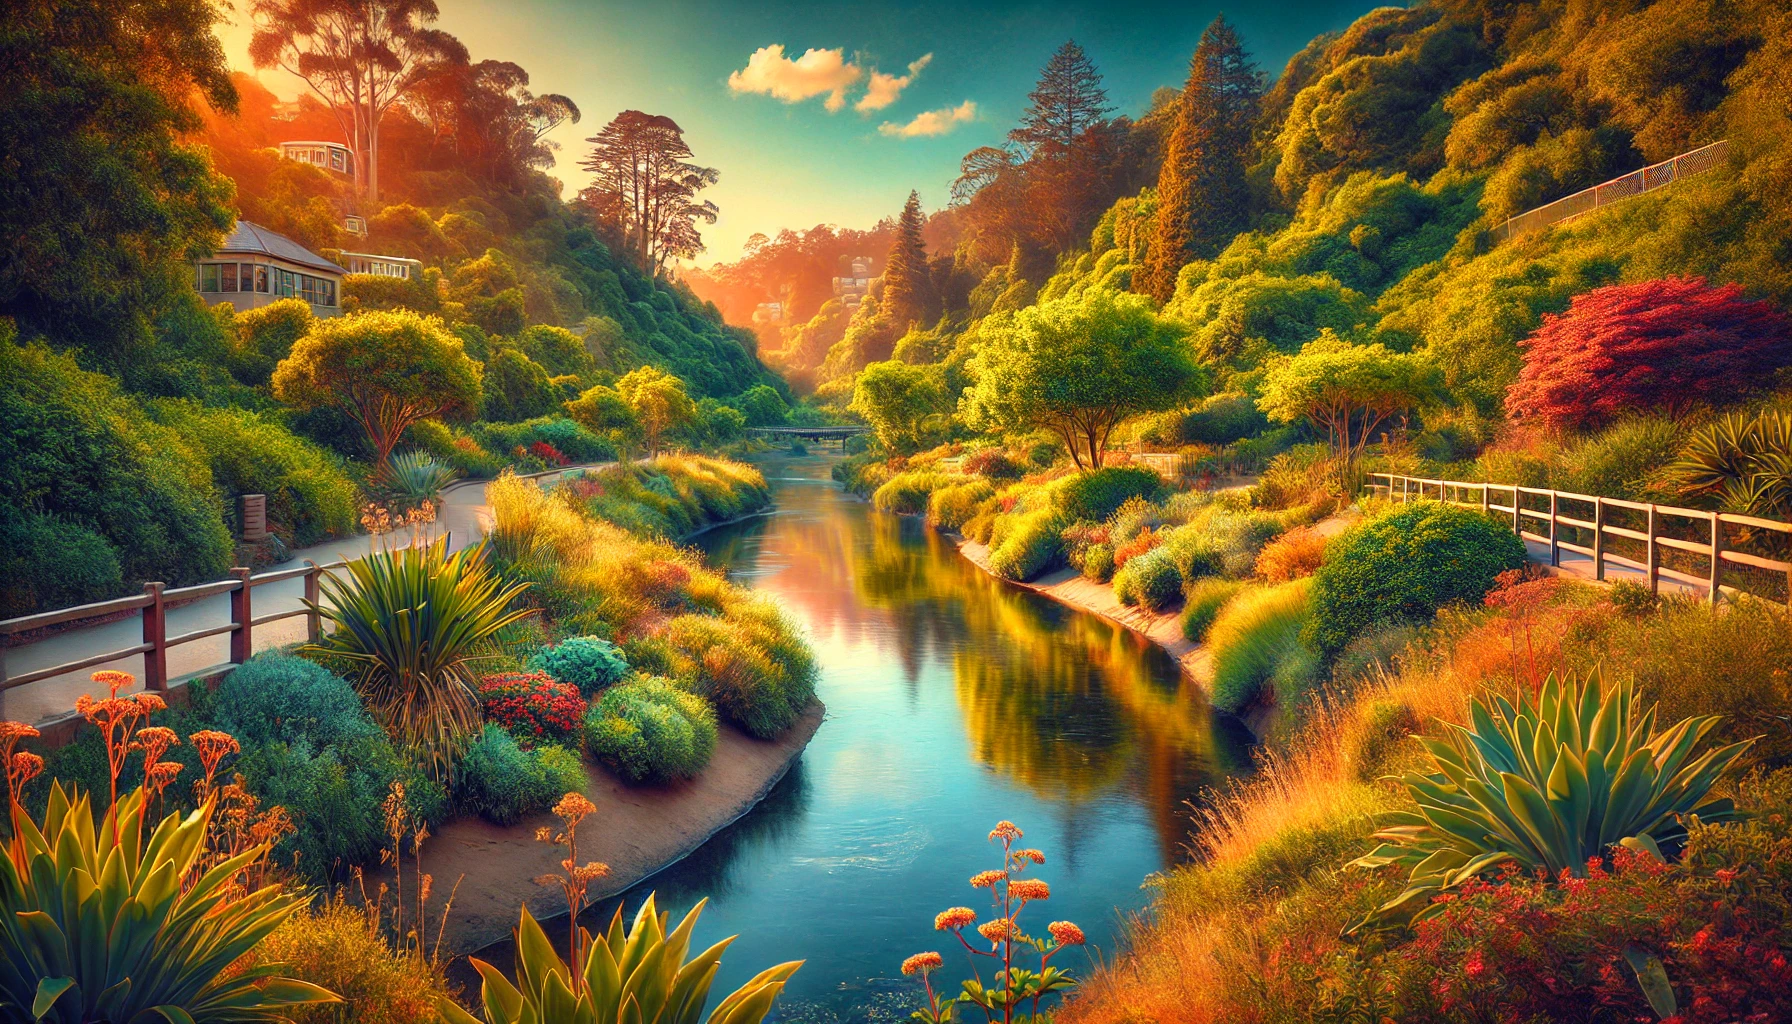 Strawberry Creek in Berkeley, surrounded by lush greenery with trees and bushes lining its banks, reflecting vibrant colors. The clear water gently flows through a serene landscape under a blue sky with fluffy clouds.